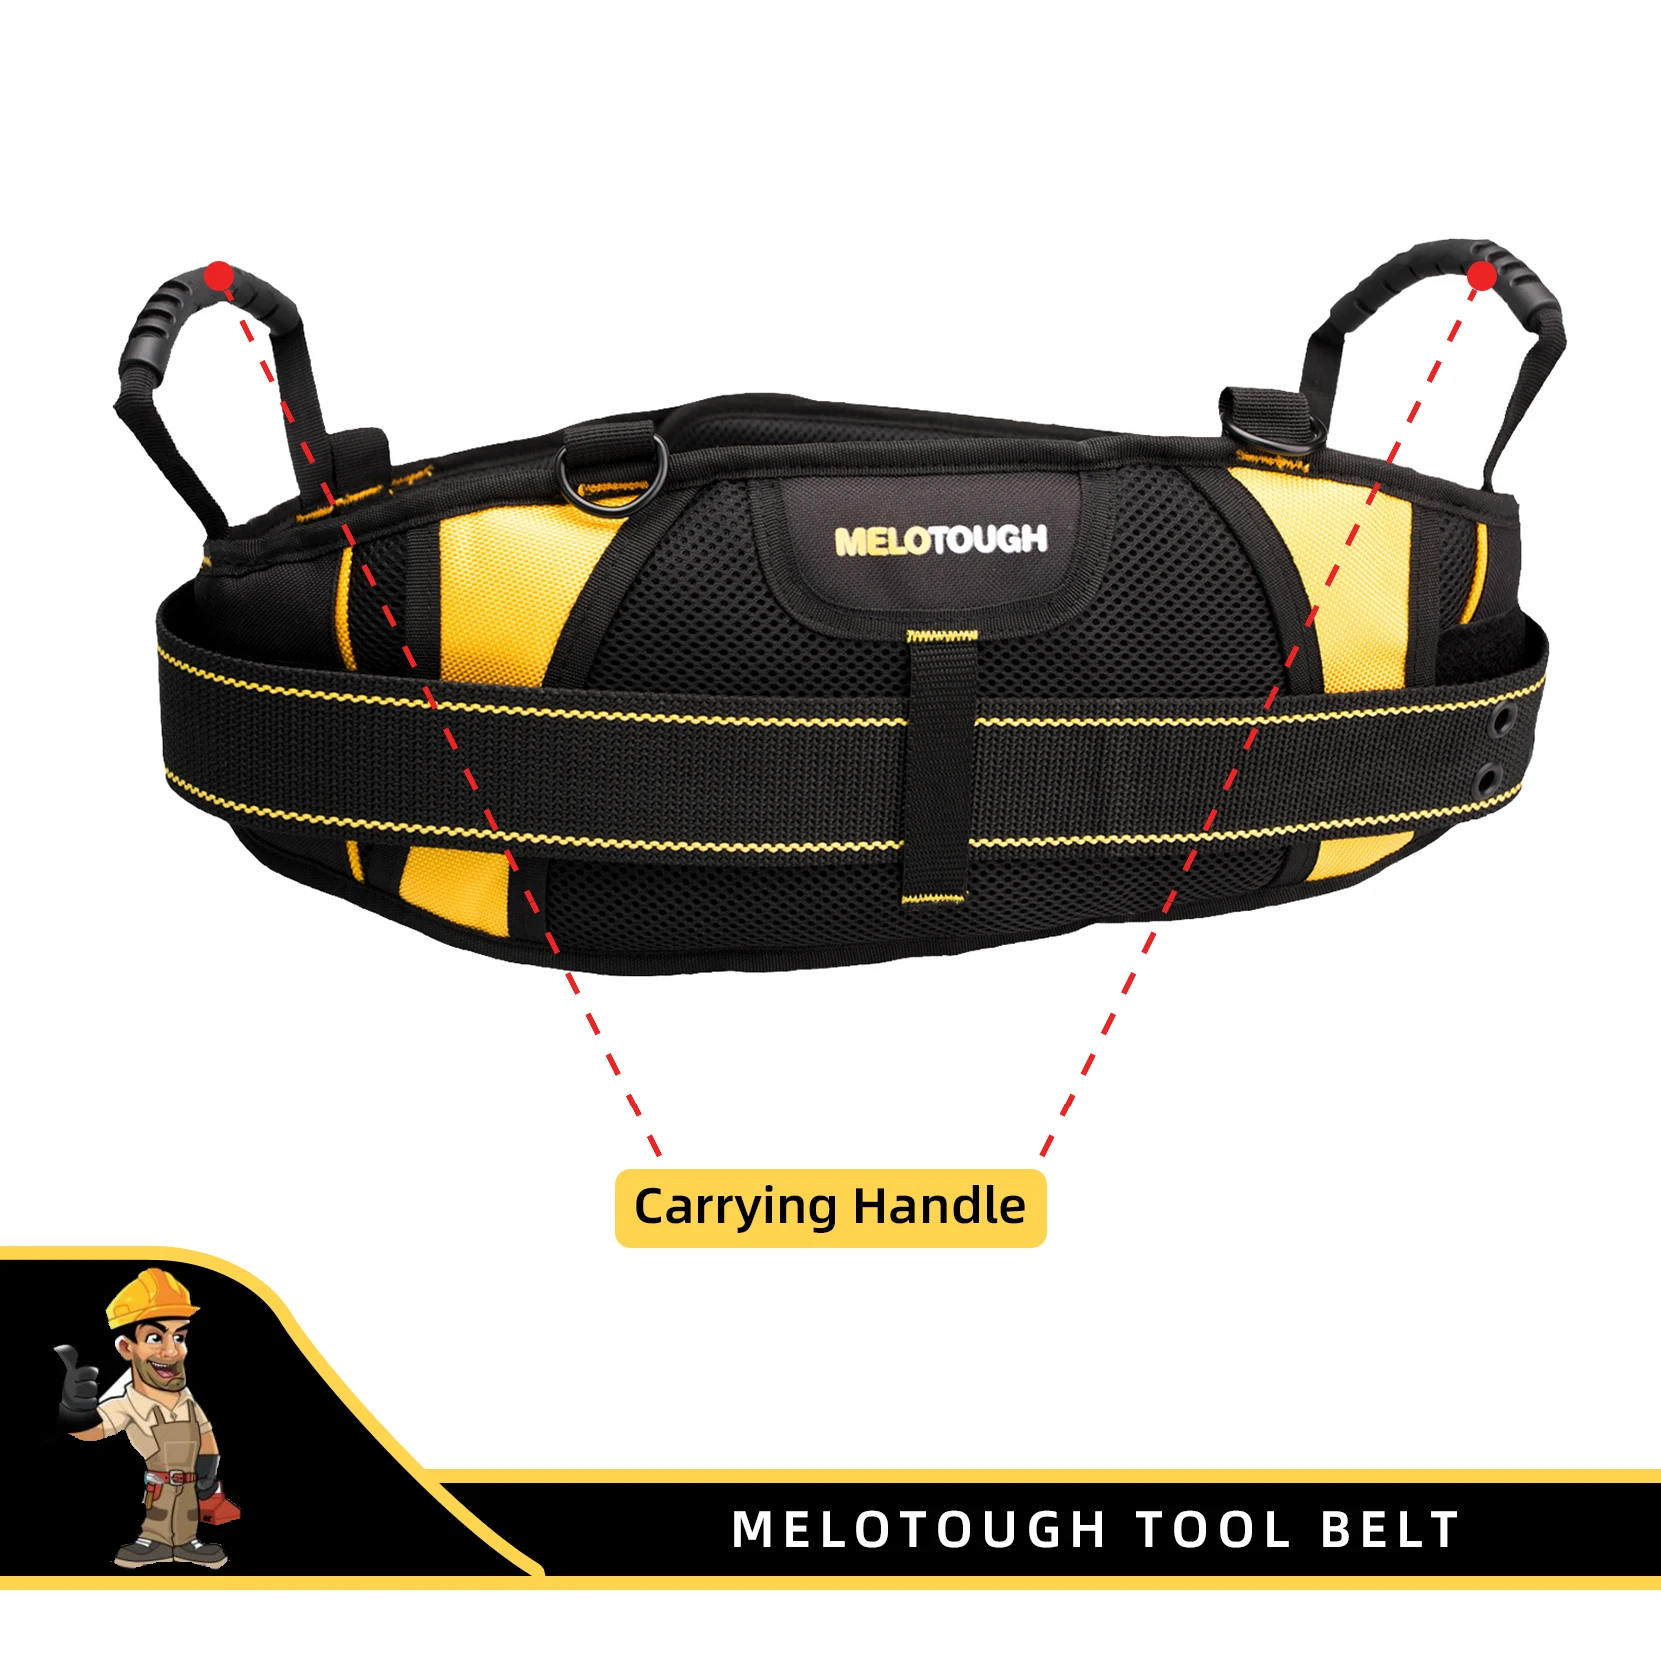 MELOTOUGH Padded Electrician Tool Belt Tradesman Pro Padded Tool Belt With Back Support Heavy Foam Padding Carrying Handle,